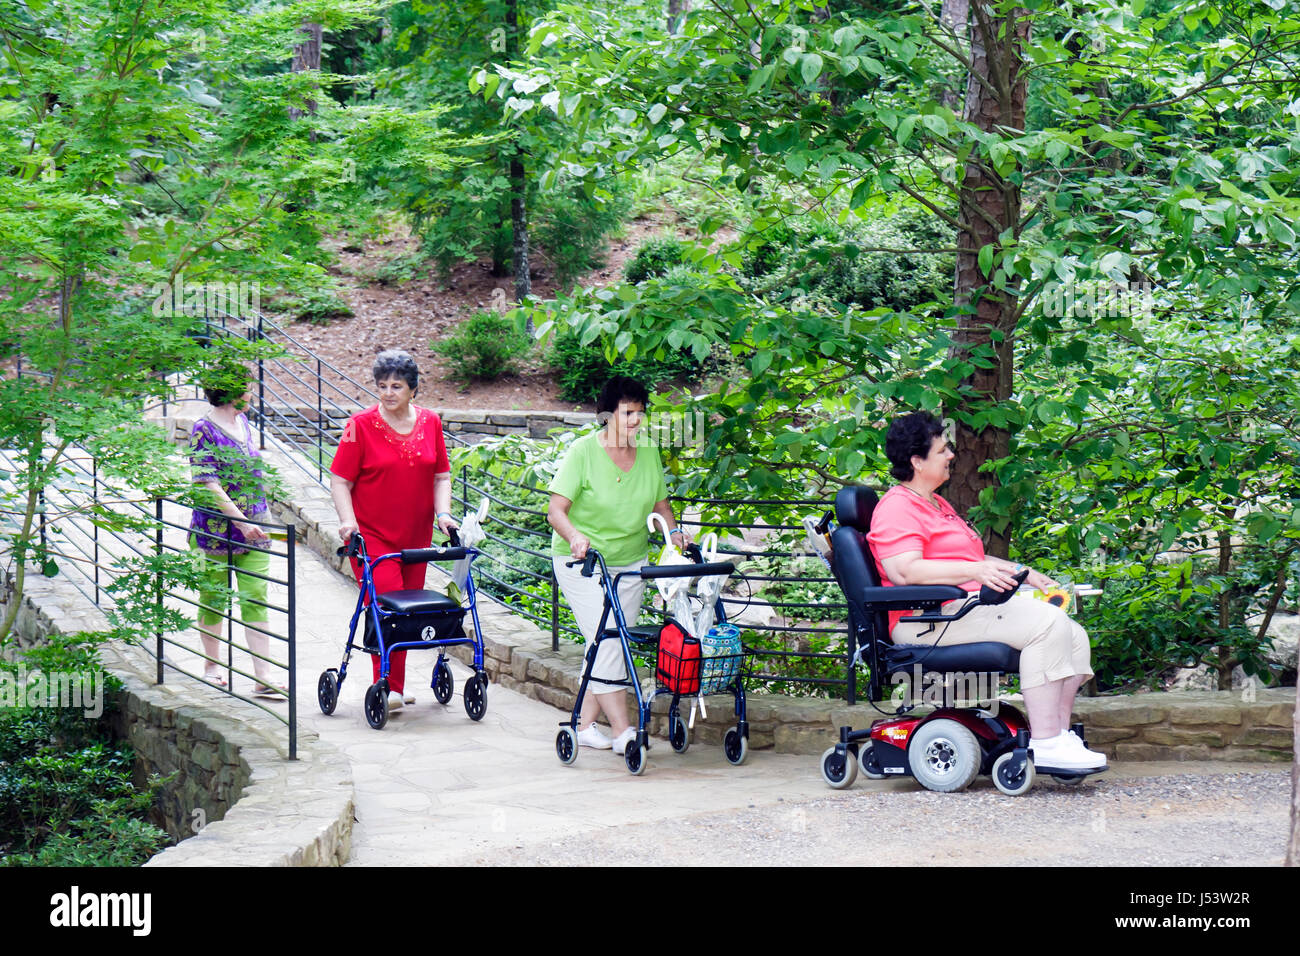 Arkansas Hot Springs,Garvan Woodland Gardens,woman female women,group,disabled,physically impaired,accessible,electric wheelchair,independent,mobility Stock Photo